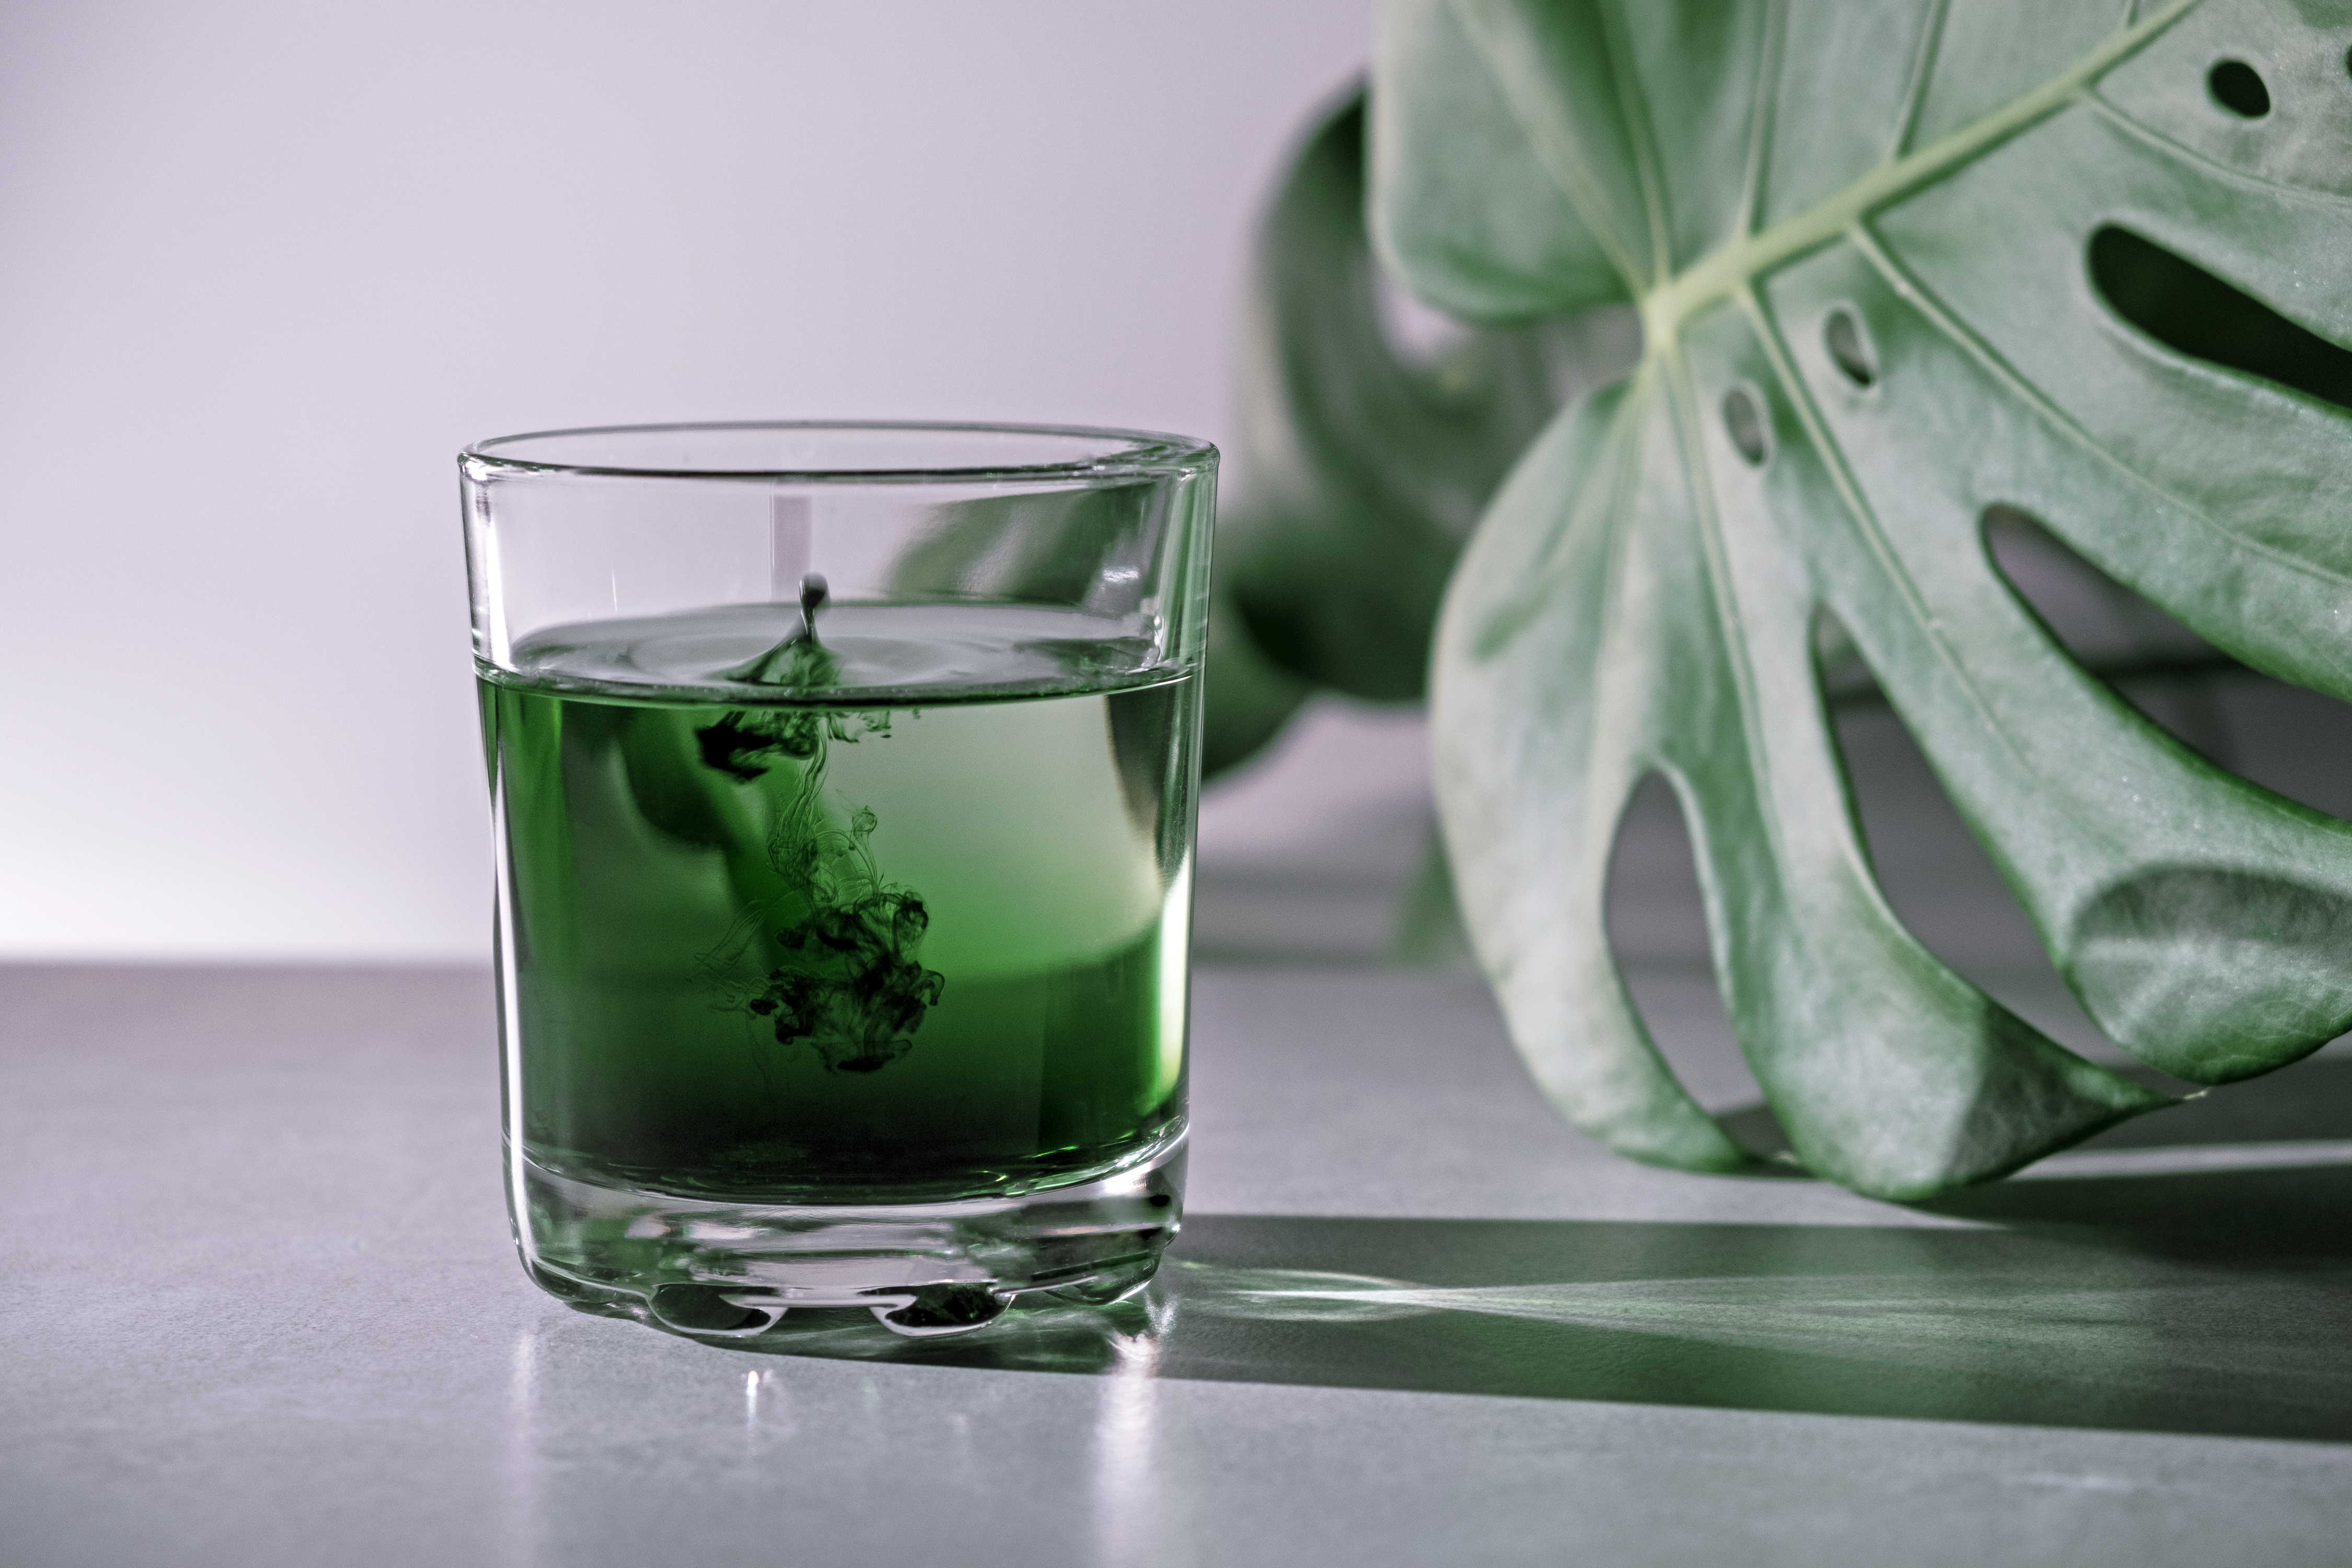 Chlorophyll: New Trend or Real-Health Benefit?